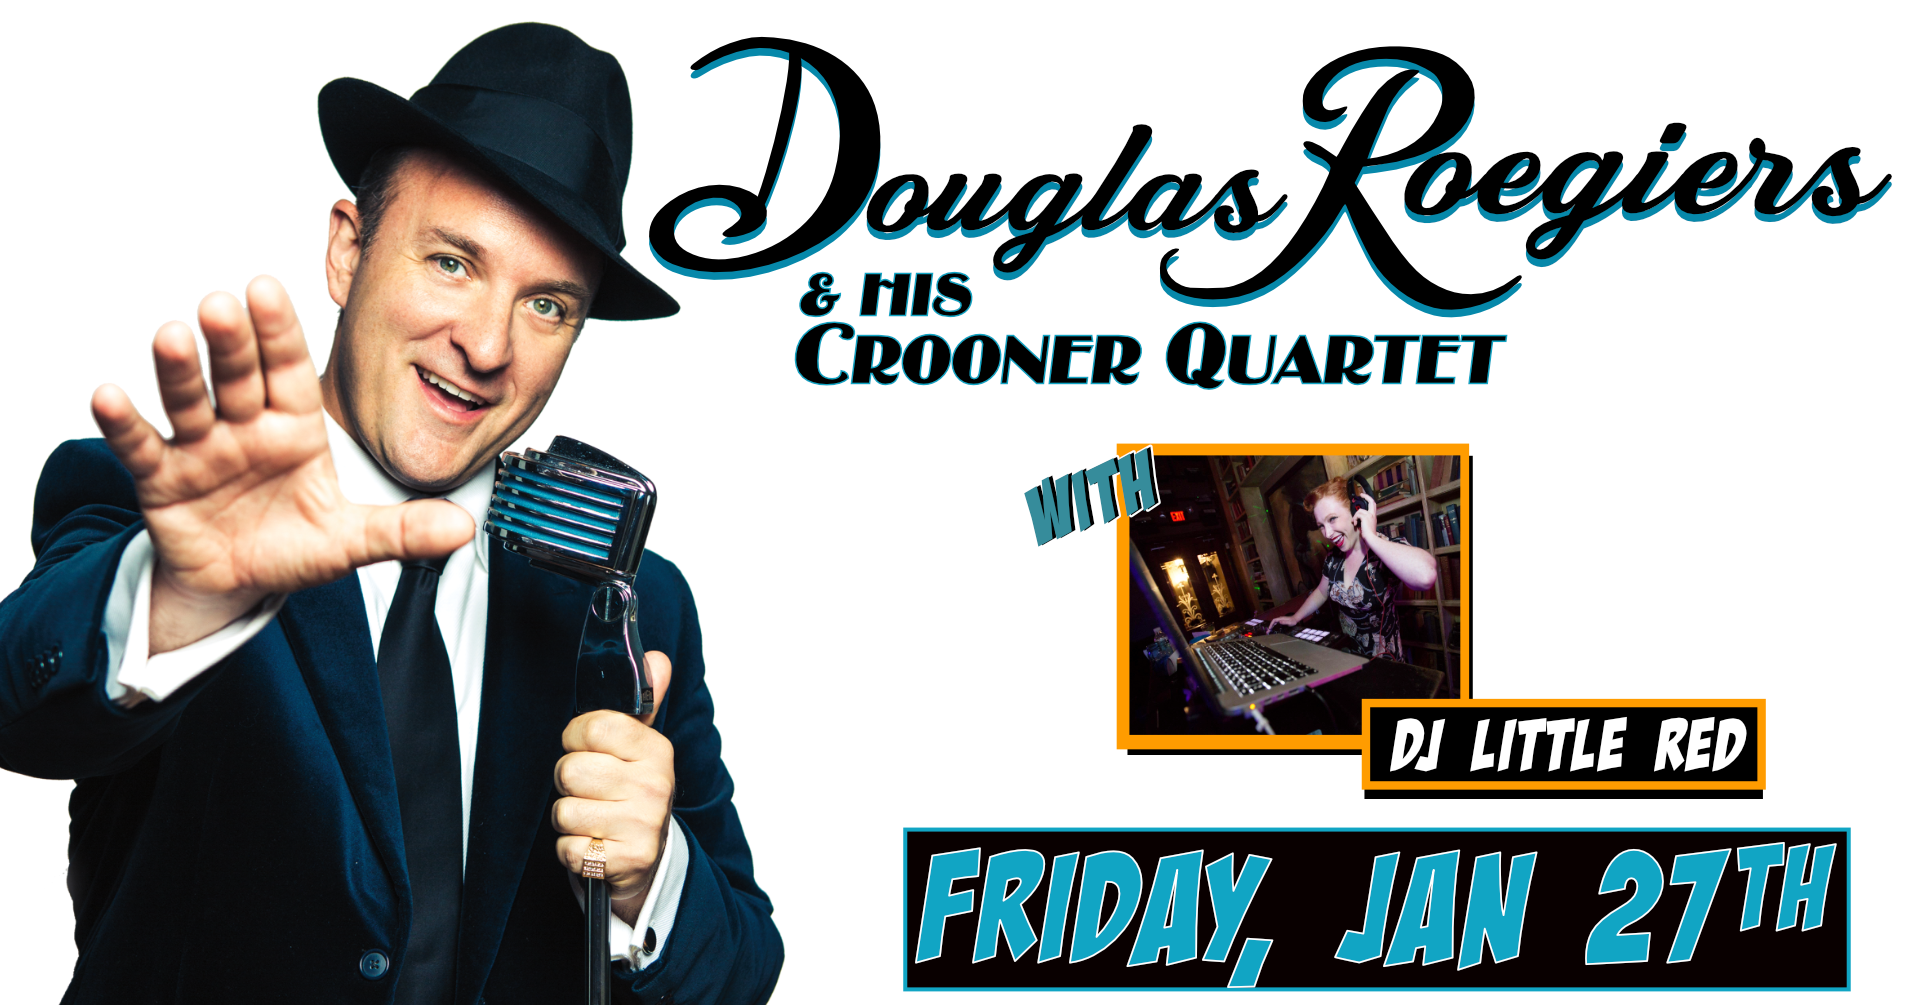 DOUGLAS ROEGIERS & HIS CROONER QUARTET with DJ LITTLE RED at The Moose!